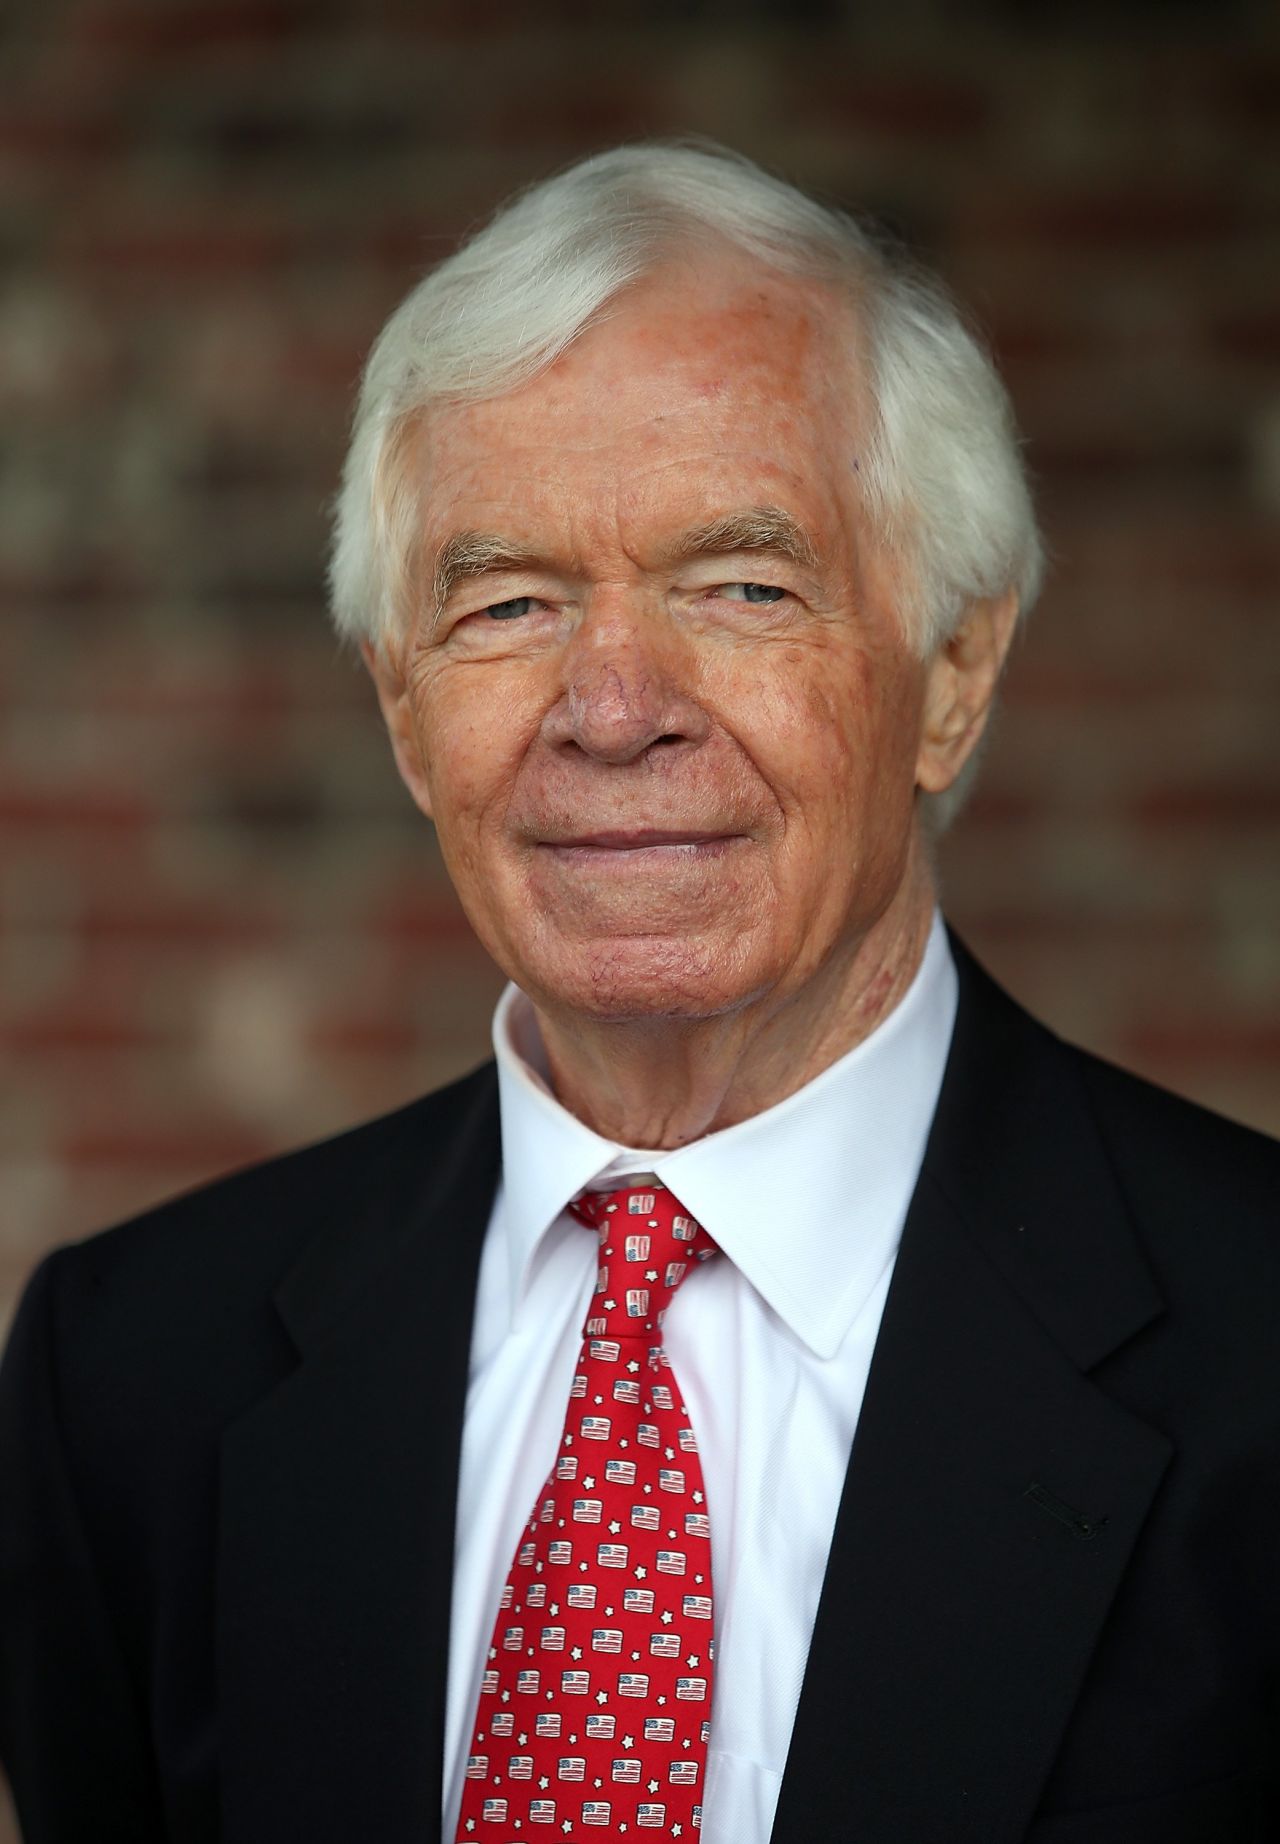 Sen. Thad Cochran is in line to become chairman of the Appropriations Committee. The Mississippi Republican will have major influence over government funding as he oversees 13 spending bills for the next fiscal year. 